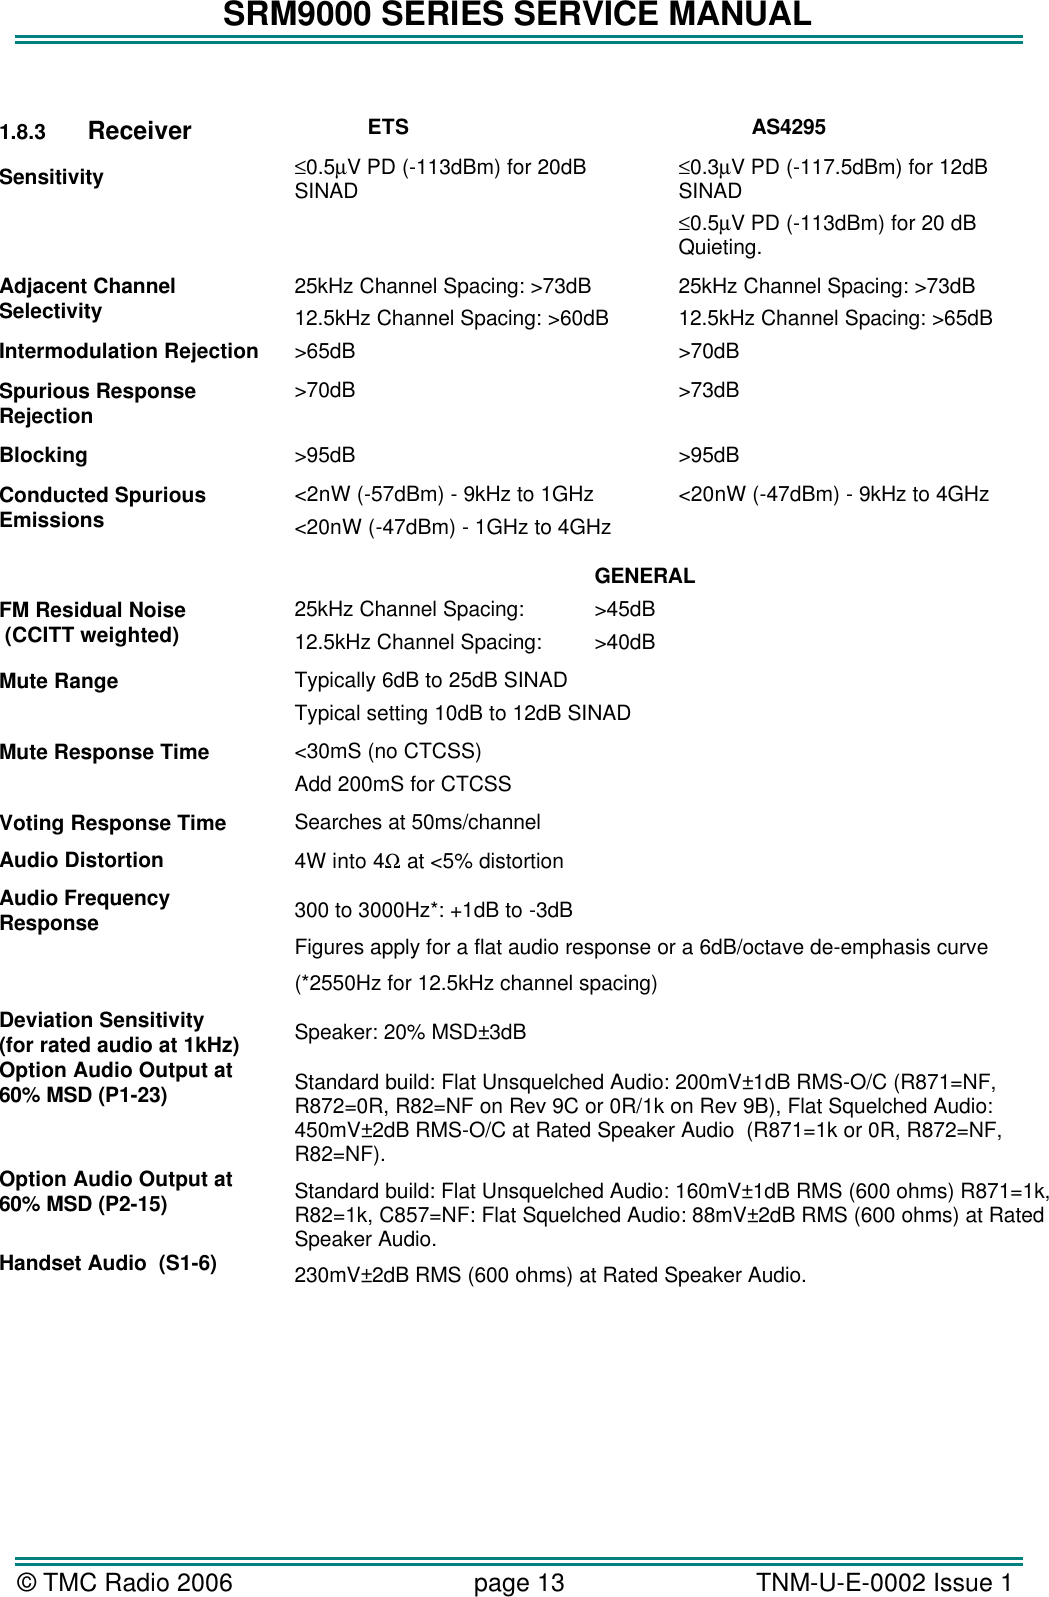 SRM9000 SERIES SERVICE MANUAL © TMC Radio 2006 page 13   TNM-U-E-0002 Issue 1   1.8.3 Receiver  ETS  AS4295 Sensitivity  ≤0.5µV PD (-113dBm) for 20dB SINAD  ≤0.3µV PD (-117.5dBm) for 12dB SINAD ≤0.5µV PD (-113dBm) for 20 dB Quieting. Adjacent Channel Selectivity 25kHz Channel Spacing: &gt;73dB  12.5kHz Channel Spacing: &gt;60dB  25kHz Channel Spacing: &gt;73dB 12.5kHz Channel Spacing: &gt;65dB Intermodulation Rejection &gt;65dB                 &gt;70dB  Spurious Response Rejection &gt;70dB  &gt;73dB Blocking &gt;95dB  &gt;95dB  Conducted Spurious Emissions &lt;2nW (-57dBm) - 9kHz to 1GHz &lt;20nW (-47dBm) - 1GHz to 4GHz &lt;20nW (-47dBm) - 9kHz to 4GHz       GENERAL FM Residual Noise  (CCITT weighted) 25kHz Channel Spacing: &gt;45dB 12.5kHz Channel Spacing: &gt;40dB Mute Range  Typically 6dB to 25dB SINAD Typical setting 10dB to 12dB SINAD Mute Response Time  &lt;30mS (no CTCSS) Add 200mS for CTCSS Voting Response Time Searches at 50ms/channel Audio Distortion 4W into 4Ω at &lt;5% distortion Audio Frequency Response  300 to 3000Hz*: +1dB to -3dB Figures apply for a flat audio response or a 6dB/octave de-emphasis curve (*2550Hz for 12.5kHz channel spacing) Deviation Sensitivity (for rated audio at 1kHz) Speaker: 20% MSD±3dB Option Audio Output at 60% MSD (P1-23) Standard build: Flat Unsquelched Audio: 200mV±1dB RMS-O/C (R871=NF, R872=0R, R82=NF on Rev 9C or 0R/1k on Rev 9B), Flat Squelched Audio: 450mV±2dB RMS-O/C at Rated Speaker Audio  (R871=1k or 0R, R872=NF, R82=NF). Option Audio Output at 60% MSD (P2-15) Standard build: Flat Unsquelched Audio: 160mV±1dB RMS (600 ohms) R871=1k, R82=1k, C857=NF: Flat Squelched Audio: 88mV±2dB RMS (600 ohms) at Rated Speaker Audio. Handset Audio  (S1-6) 230mV±2dB RMS (600 ohms) at Rated Speaker Audio.  